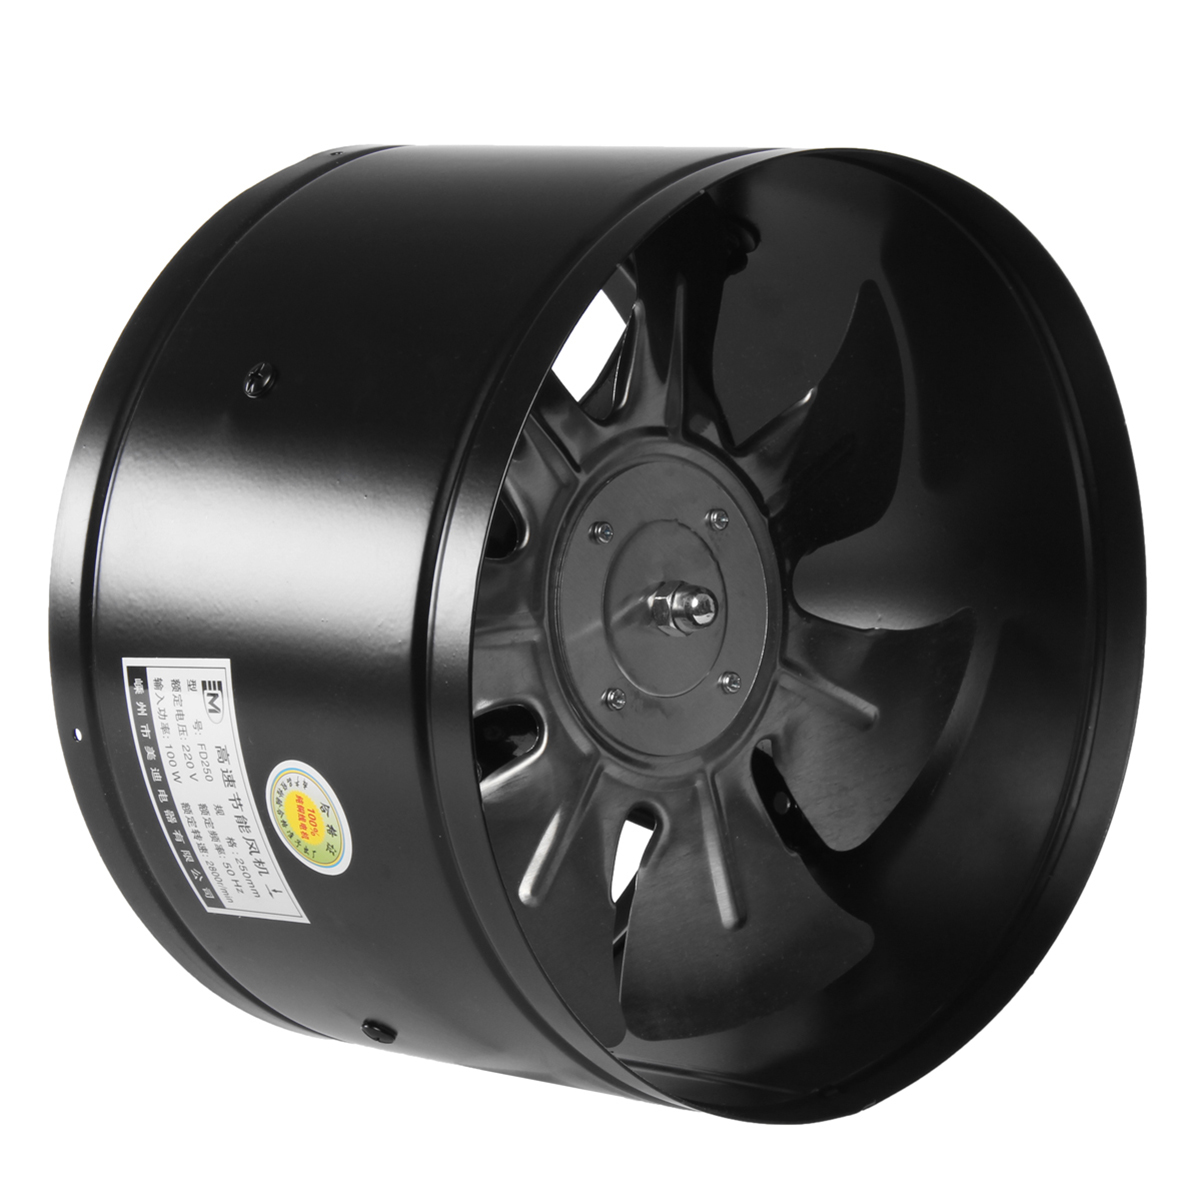 220V-46810-Inch-Inline-Duct-Fan-Booster-Exhaust-Blower-Air-Cooling-Vent-Black-1353811-7